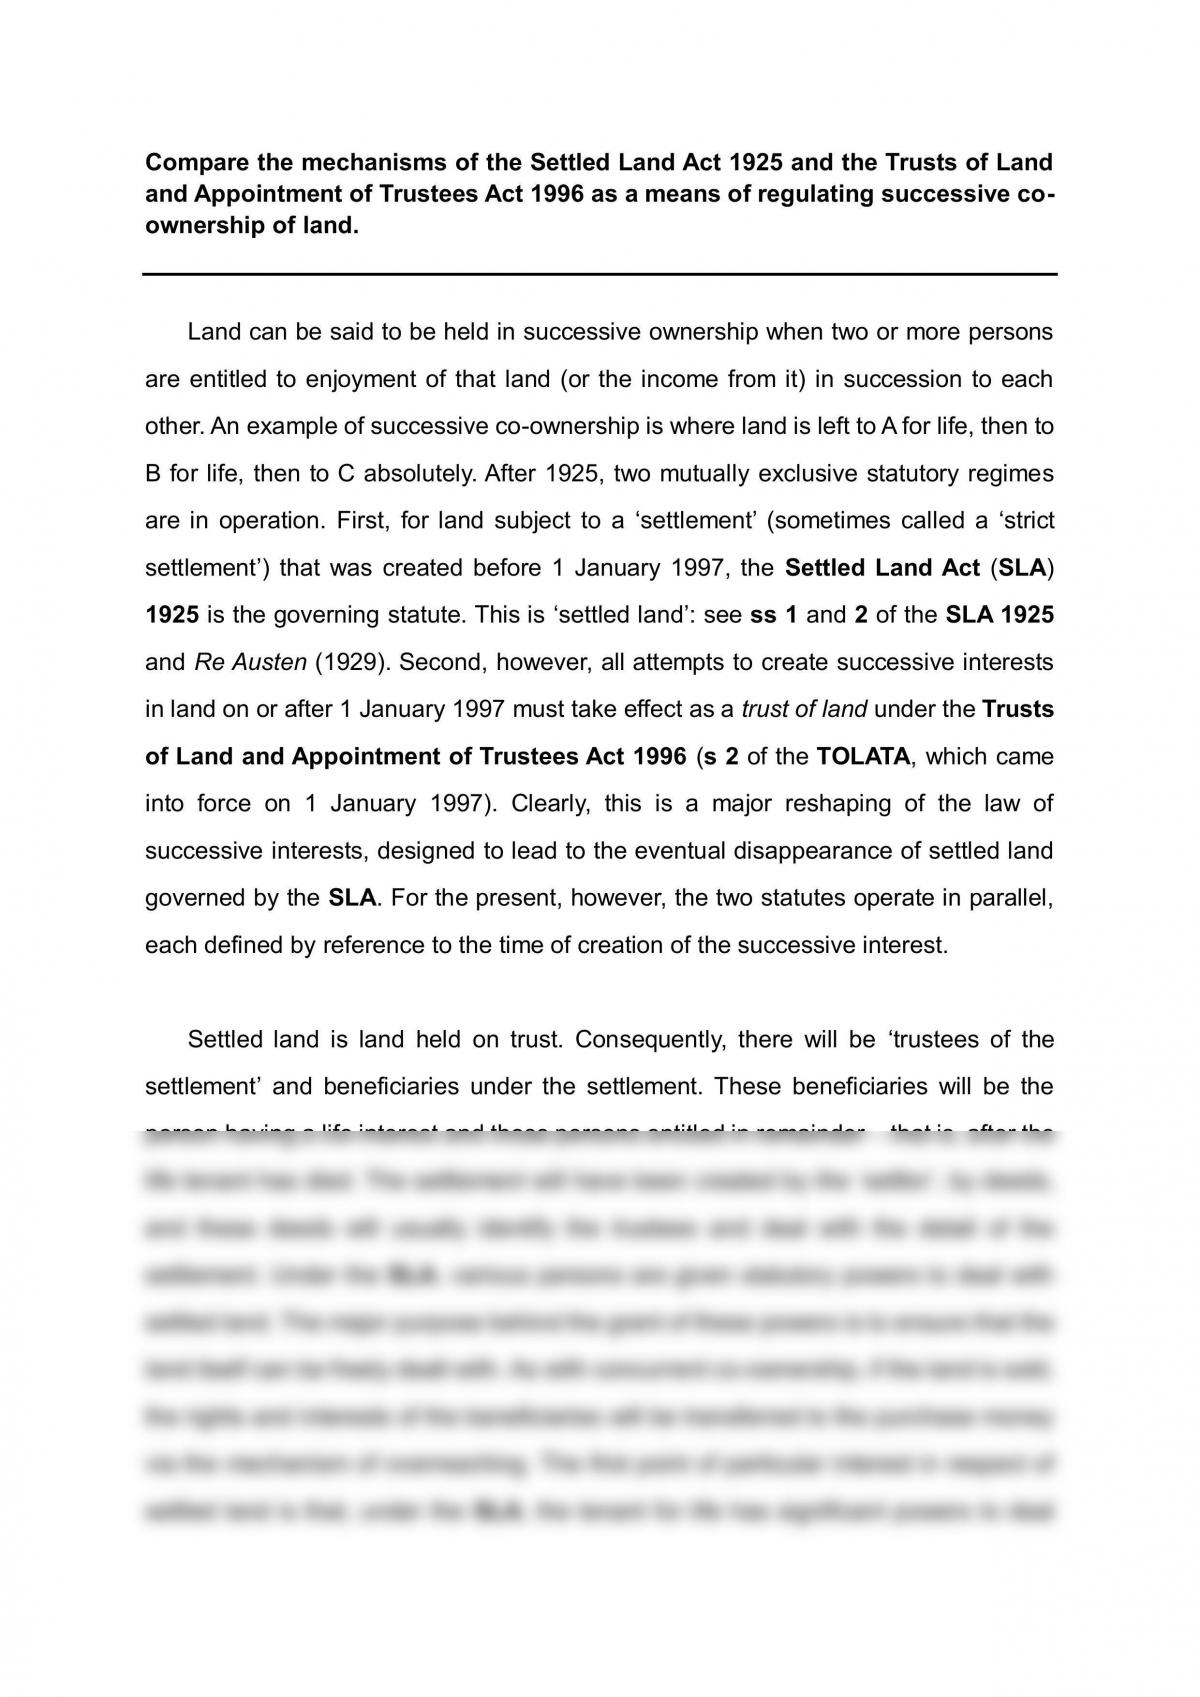 Essay comparing the mechanisms of the two statutes as a means of regulating successive coownership of land. - Page 1